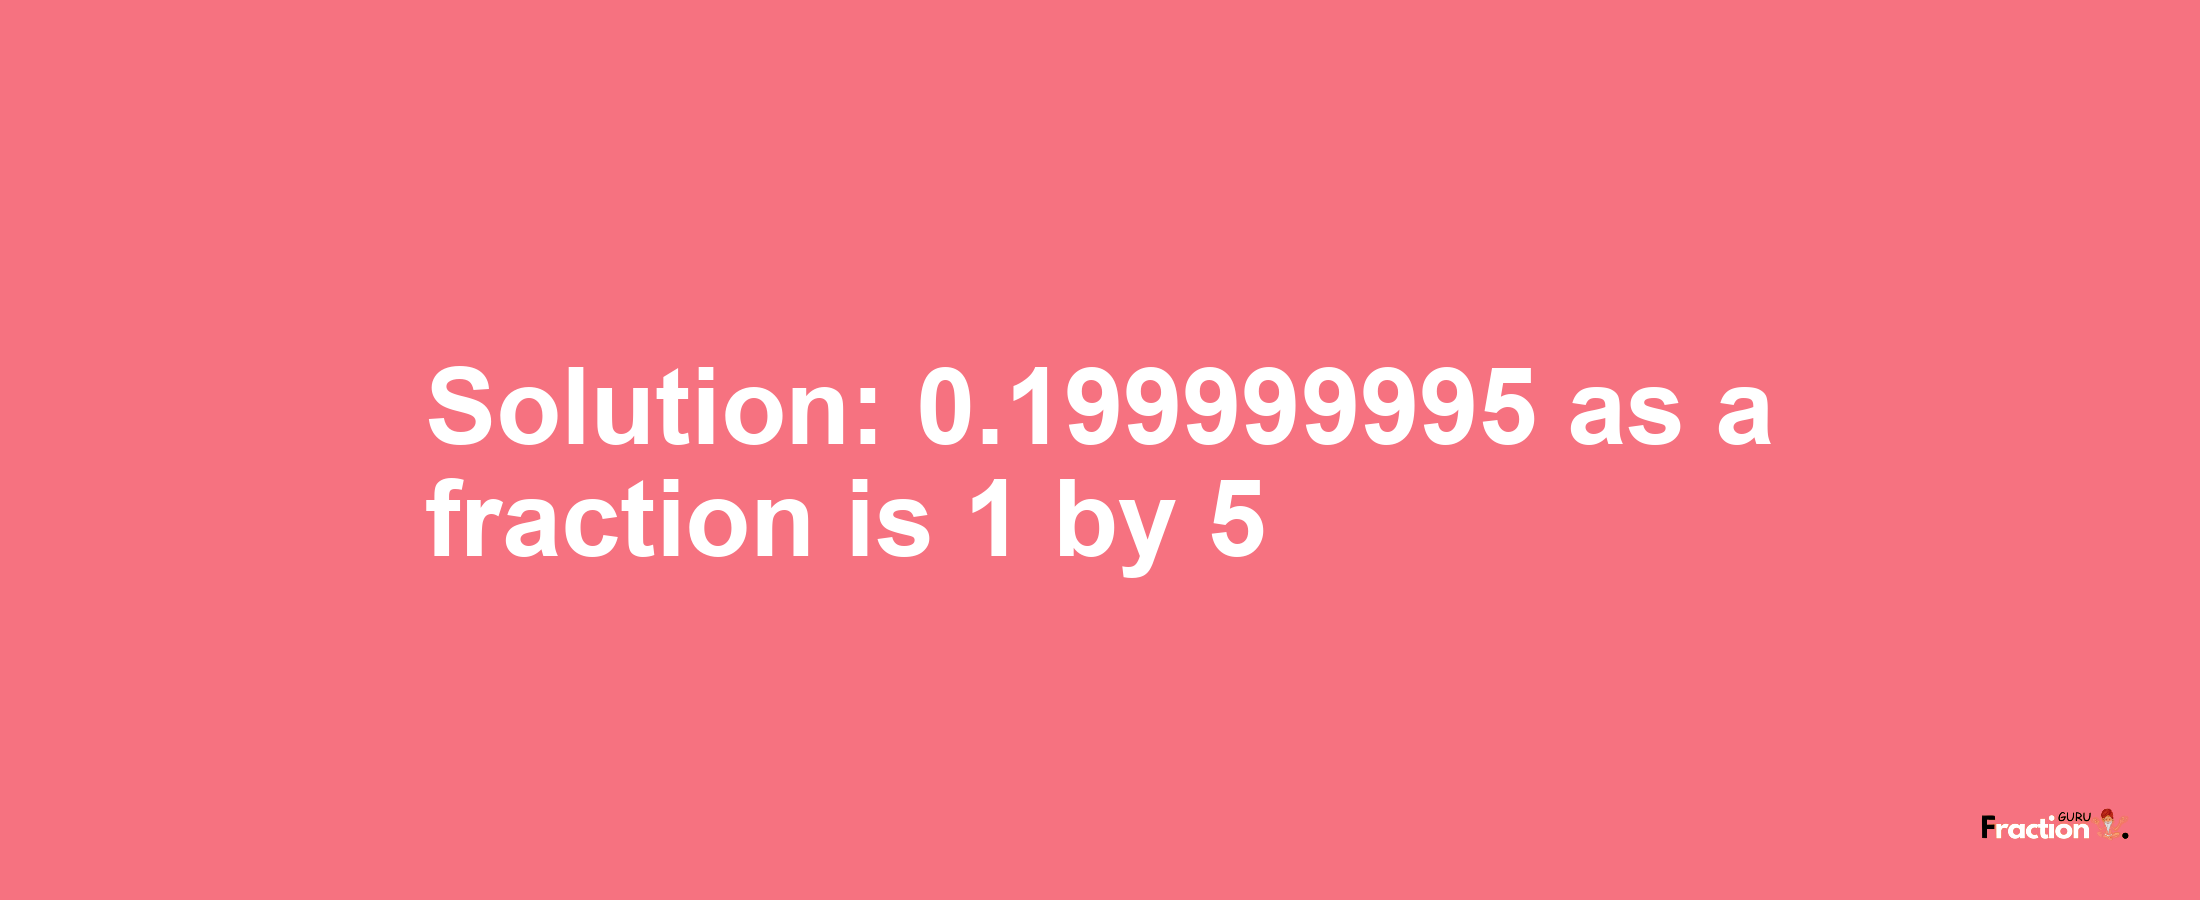 Solution:0.199999995 as a fraction is 1/5